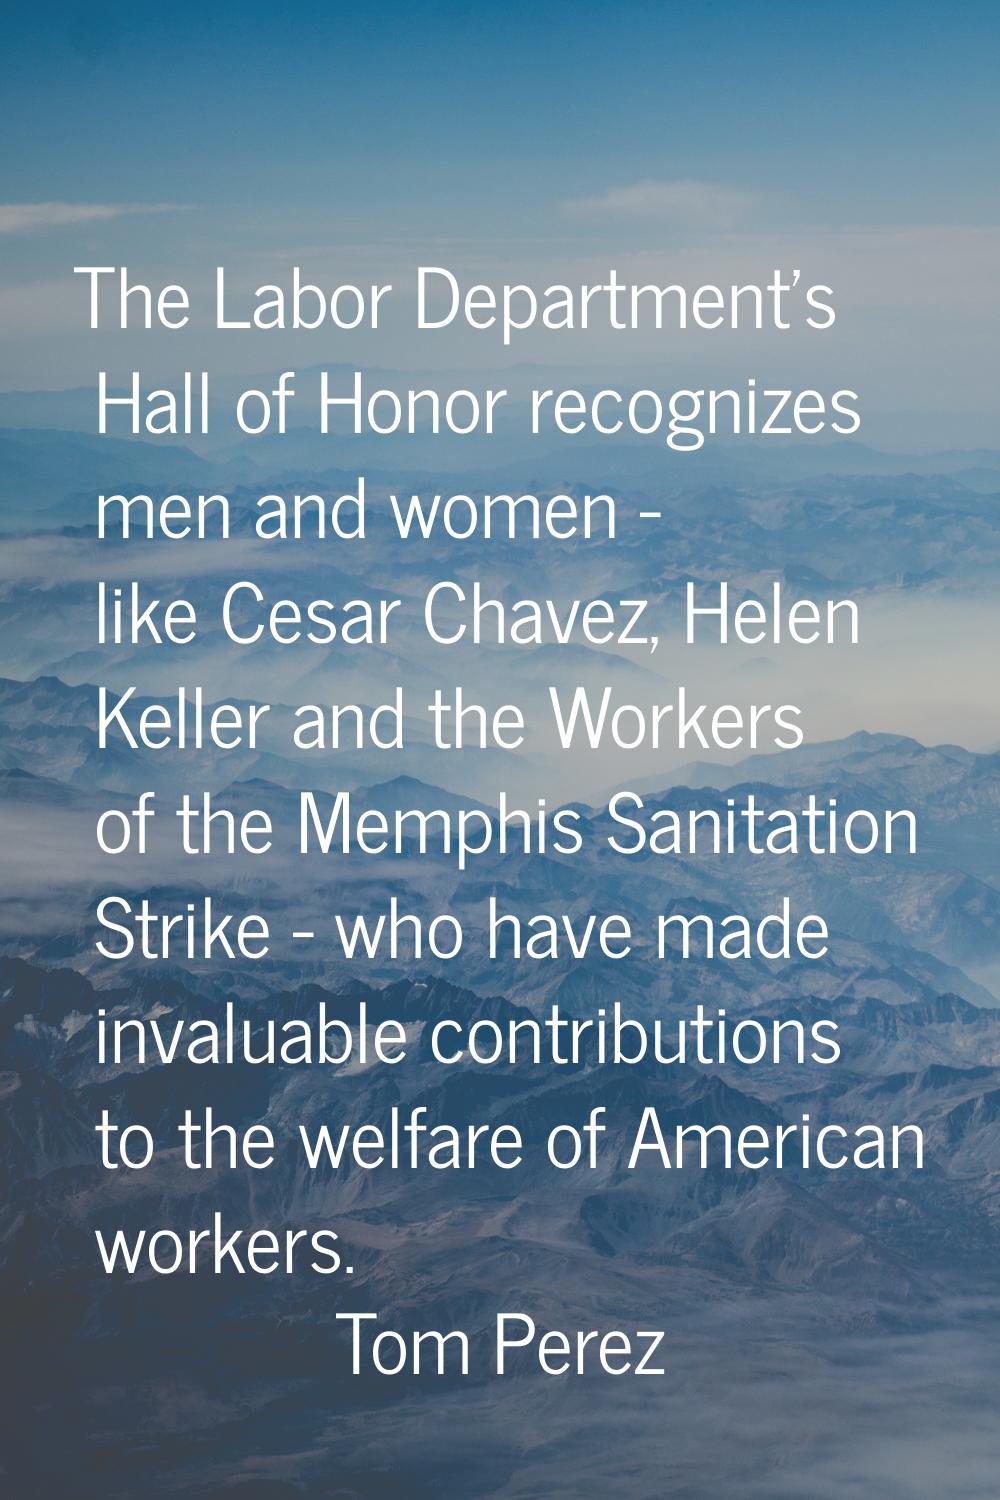 The Labor Department's Hall of Honor recognizes men and women - like Cesar Chavez, Helen Keller and